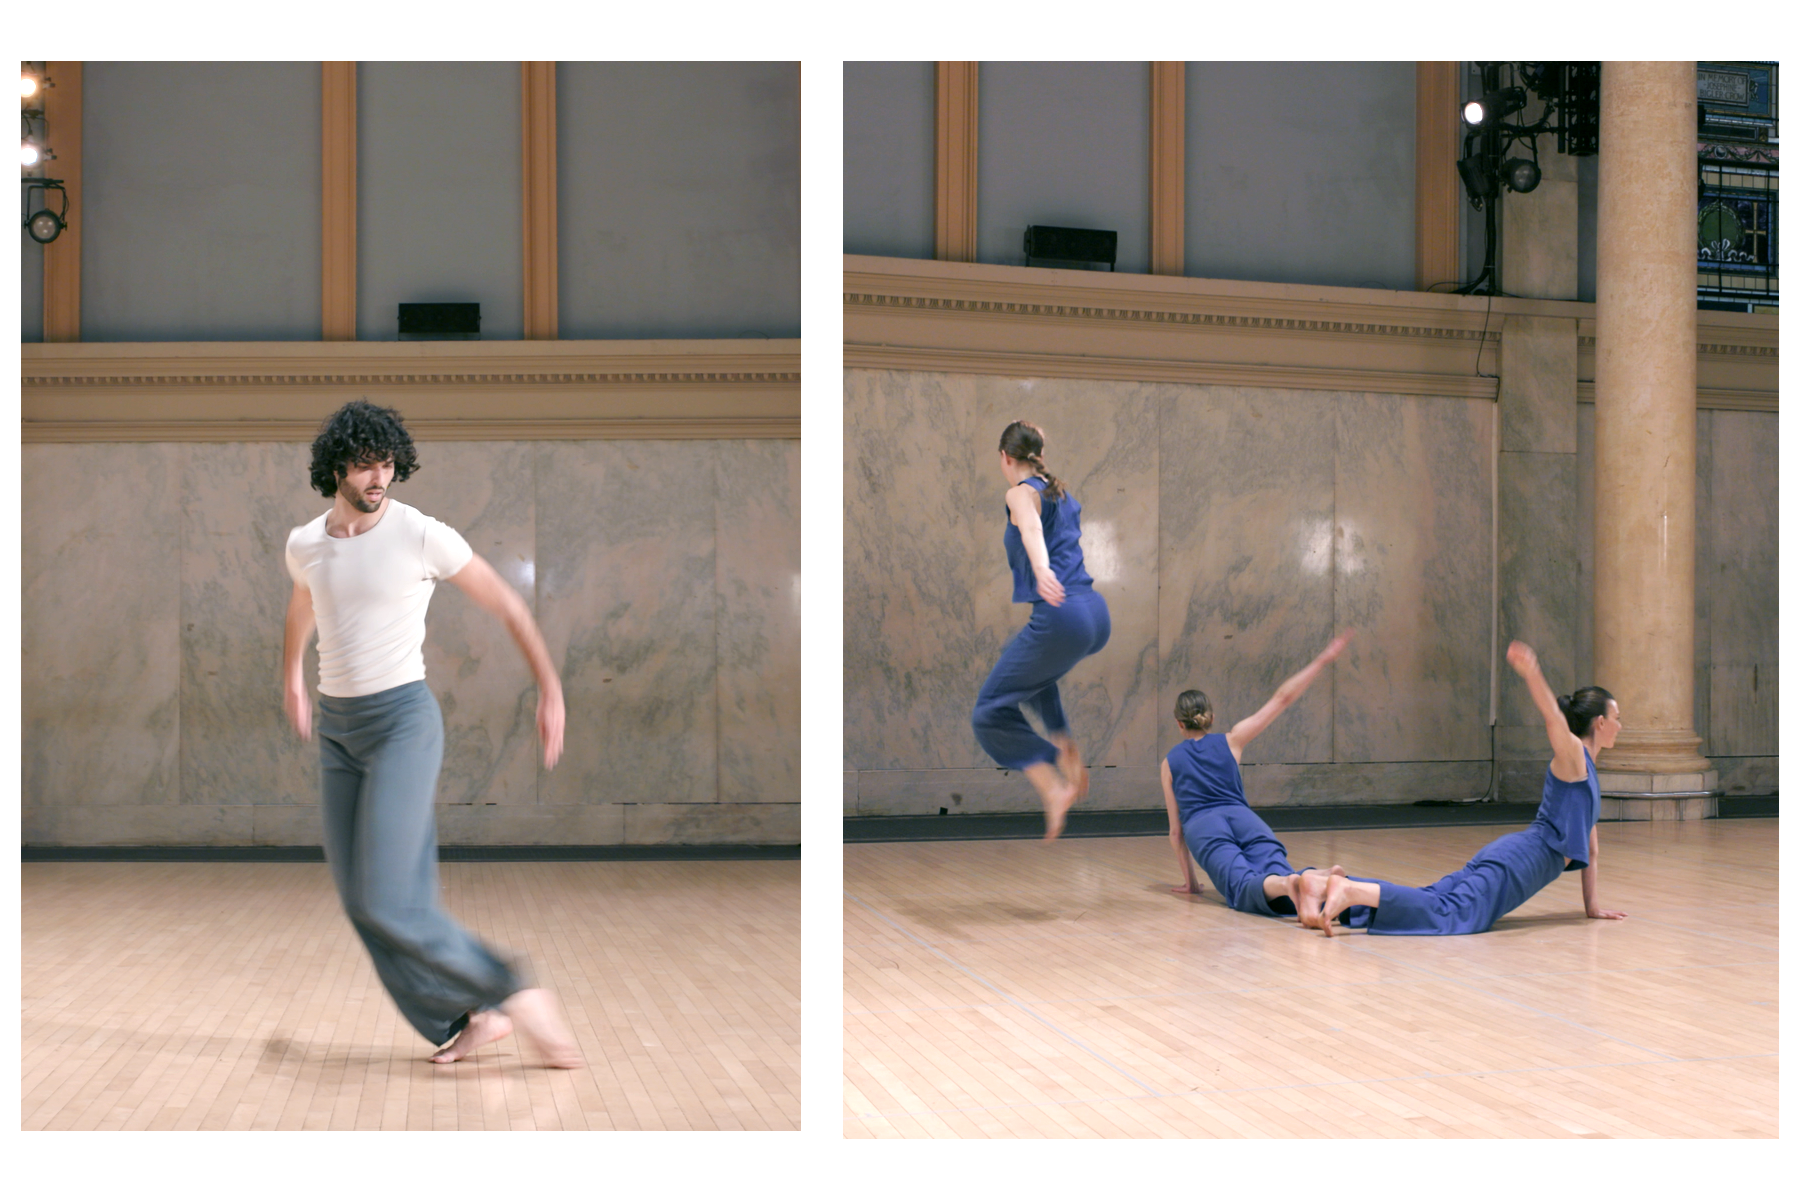 Left: Marc Crousillat in Watermotor (1978), 2021 Right: Jamie Scott, Kimberly Fulmer and Cecily Campbell in Locus Trio (1980), 2021 © Daniel Madoff